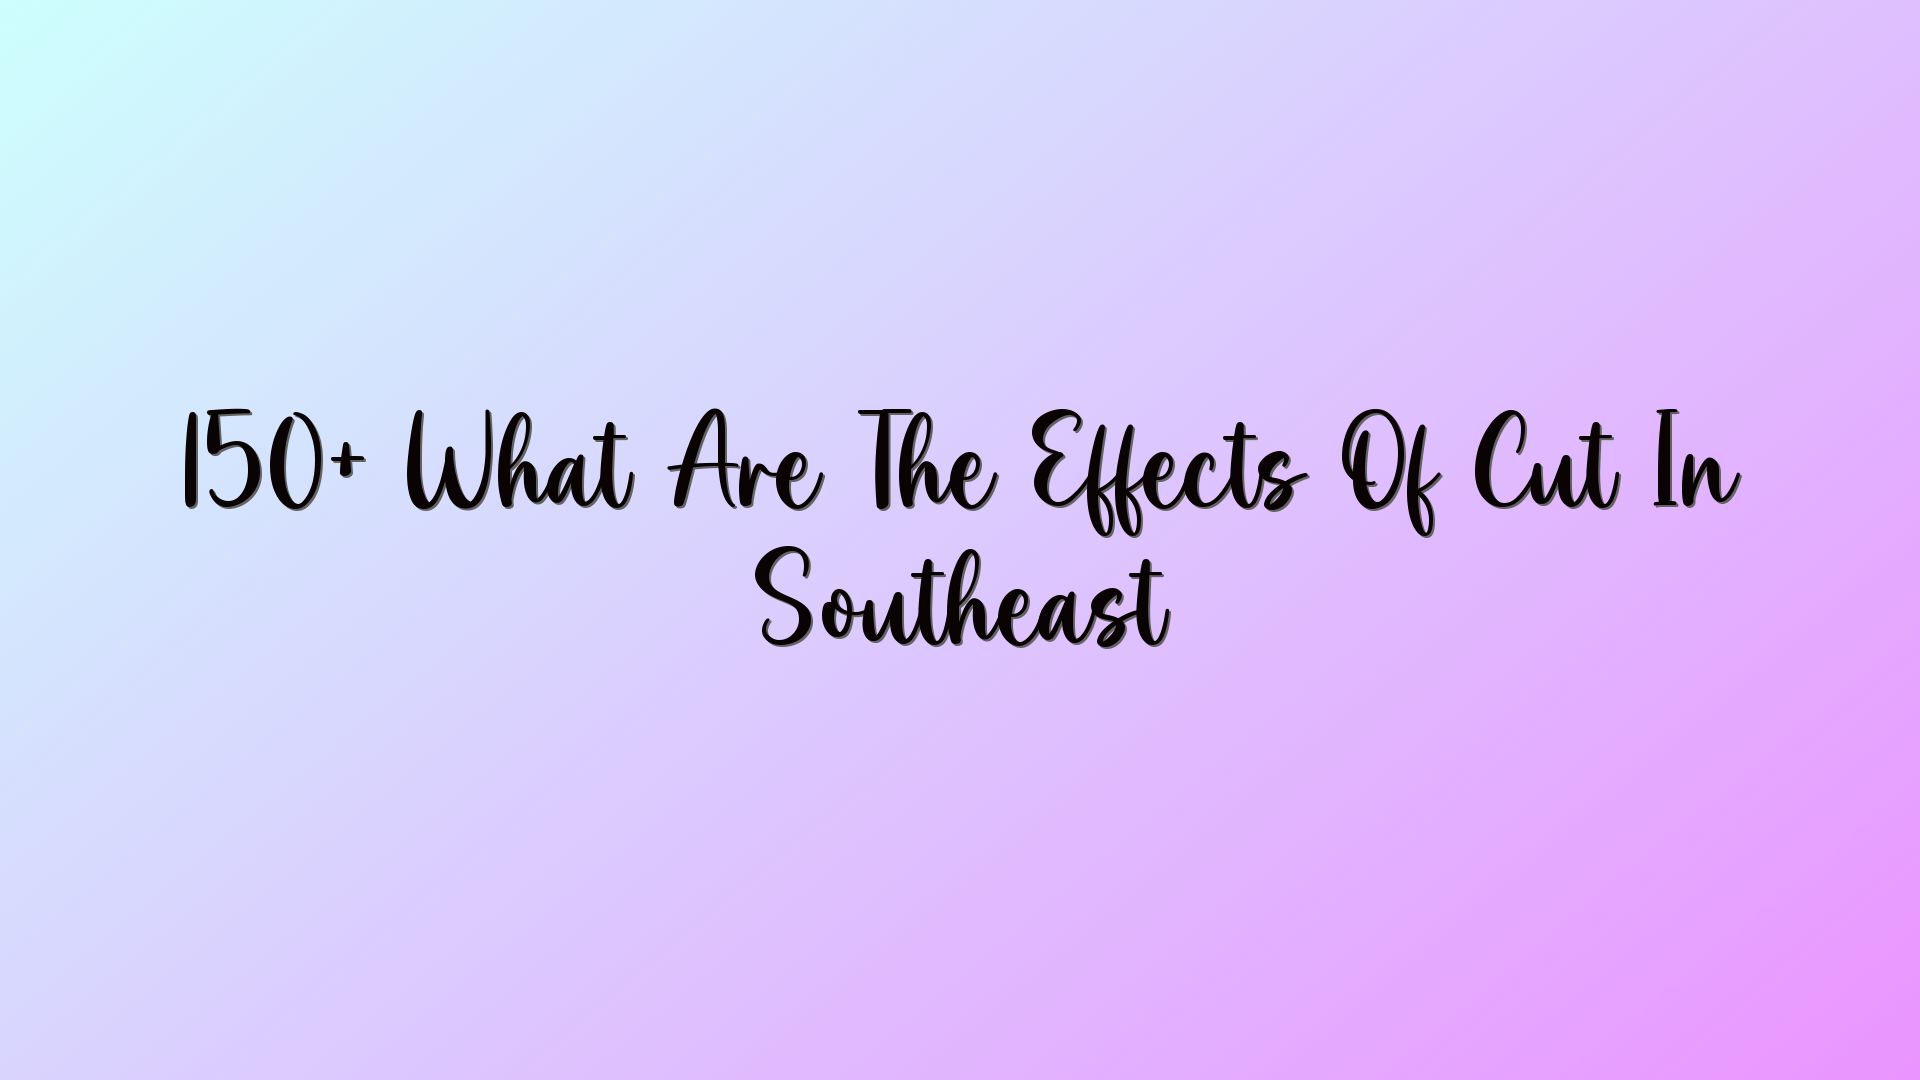 150+ What Are The Effects Of Cut In Southeast